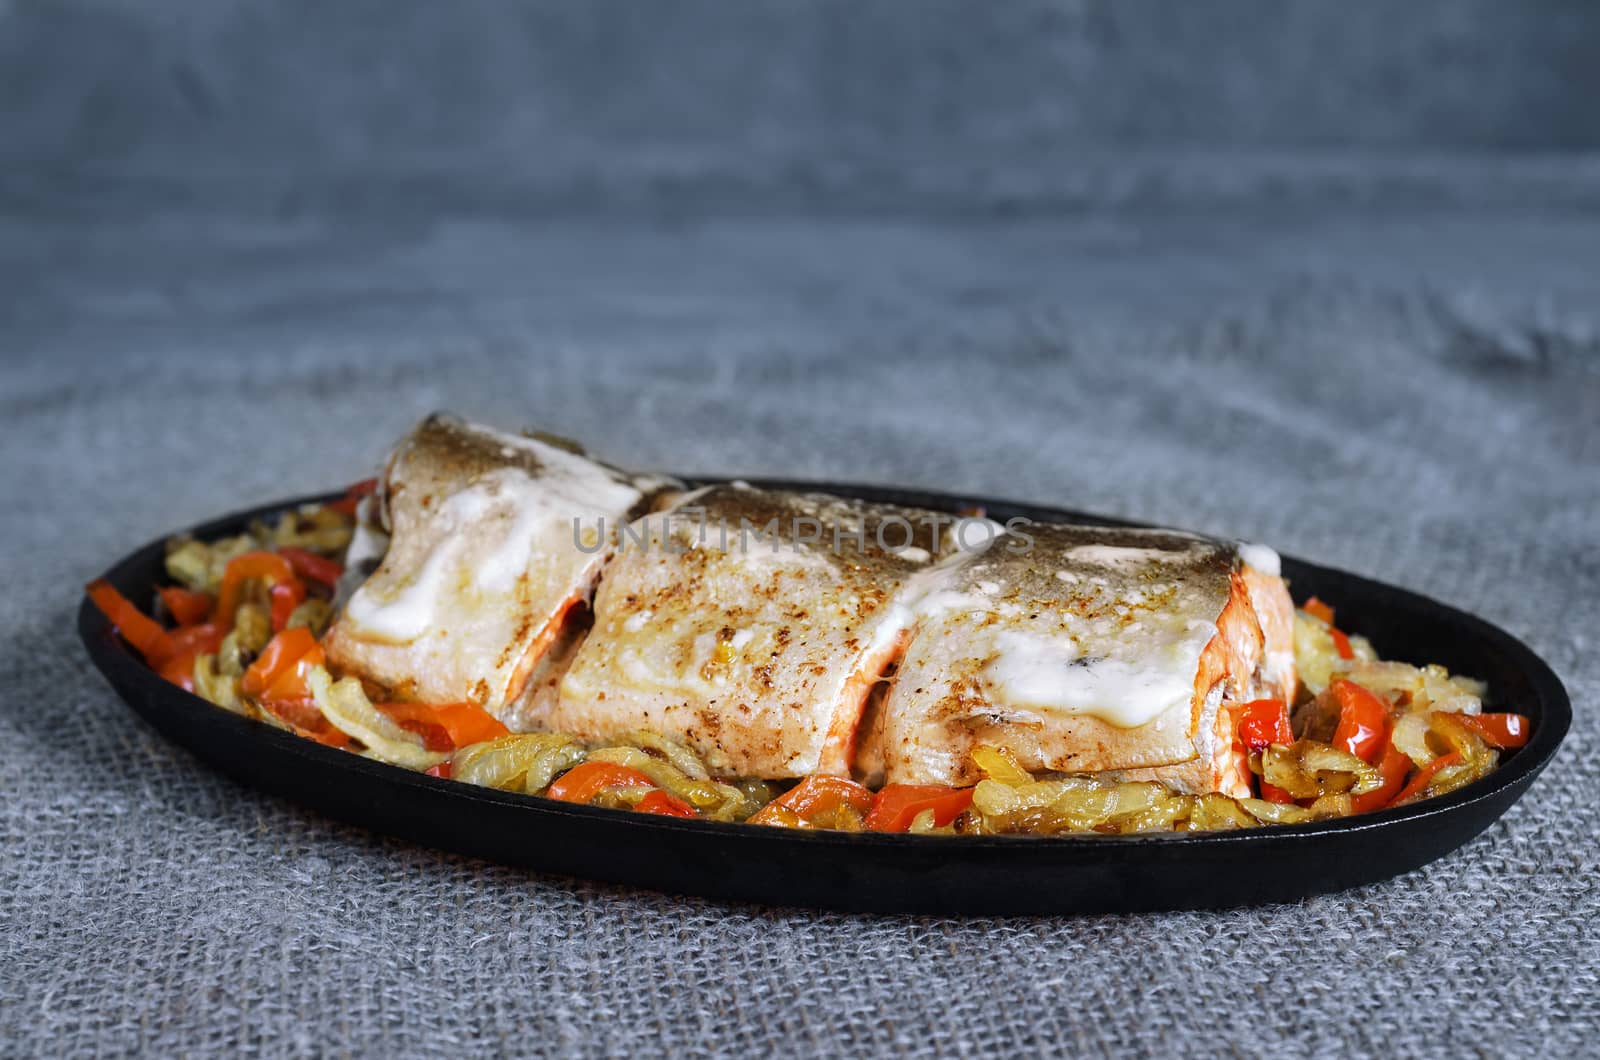 Baked fish with vegetables by Gaina